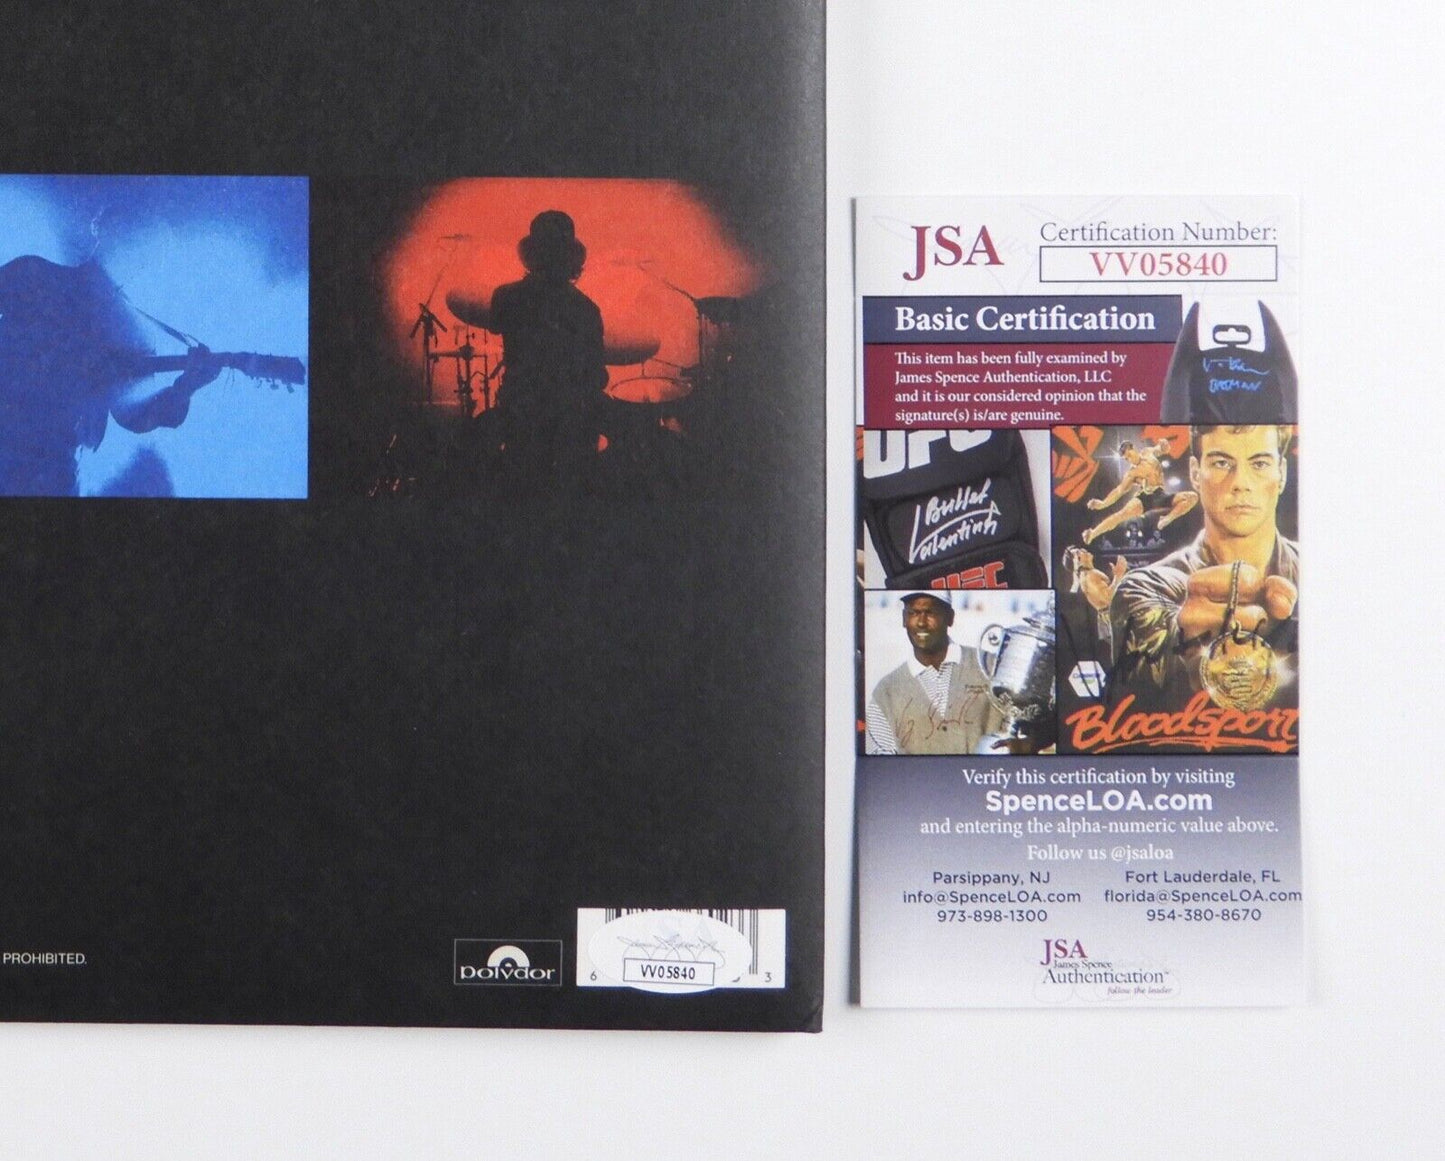 Inhaler Fully JSA Signed Autograph Album Record It Won't Always Be Like This